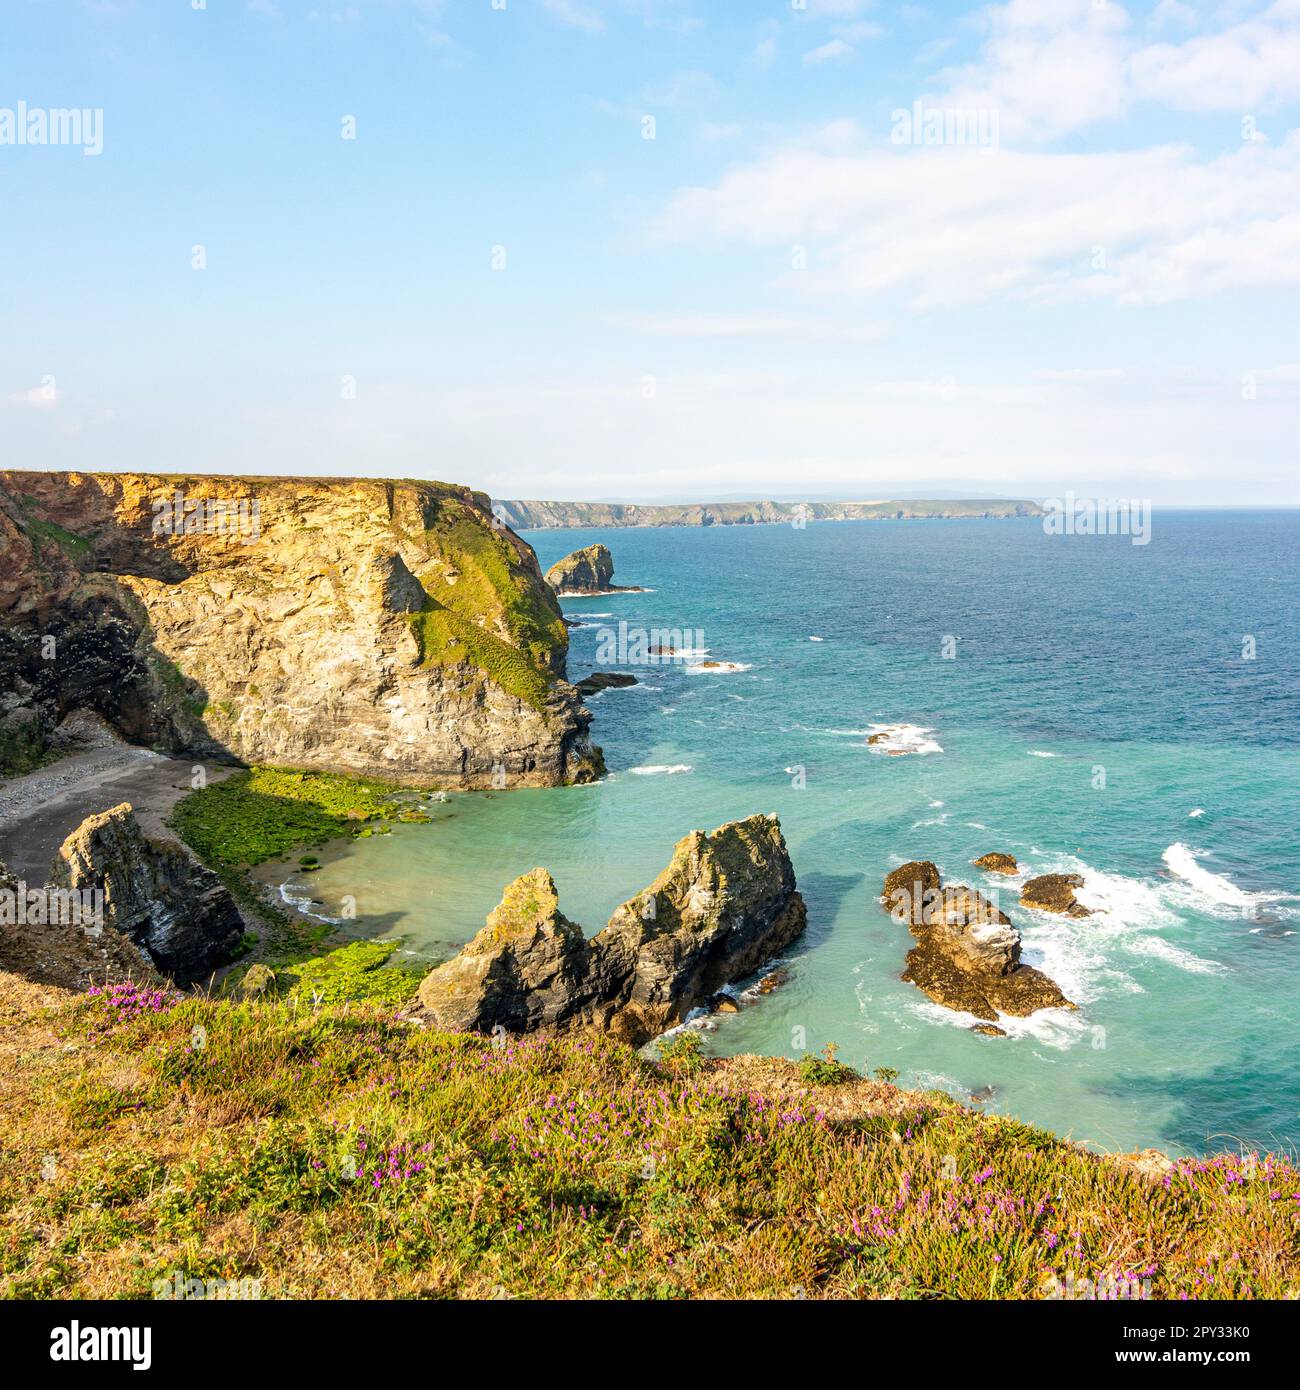 A close-to-the-edge view looking over Western Cove below Western Hill - Portreath, north Cornwall, UK Stock Photo